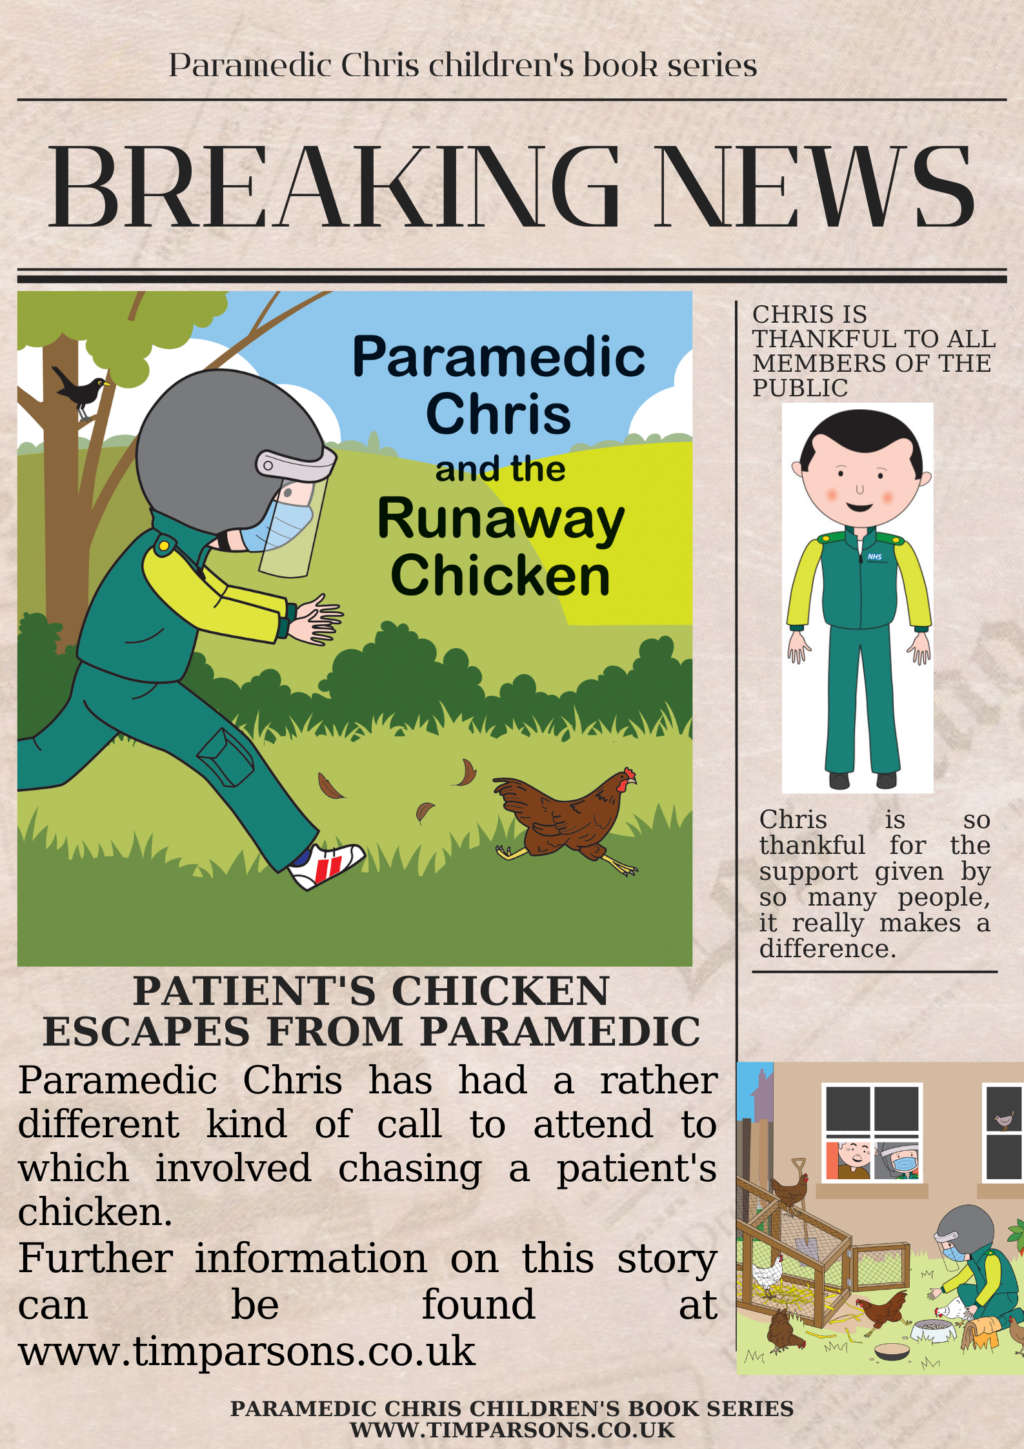 Paramedic Chris - chicken escapes from paramedic news story